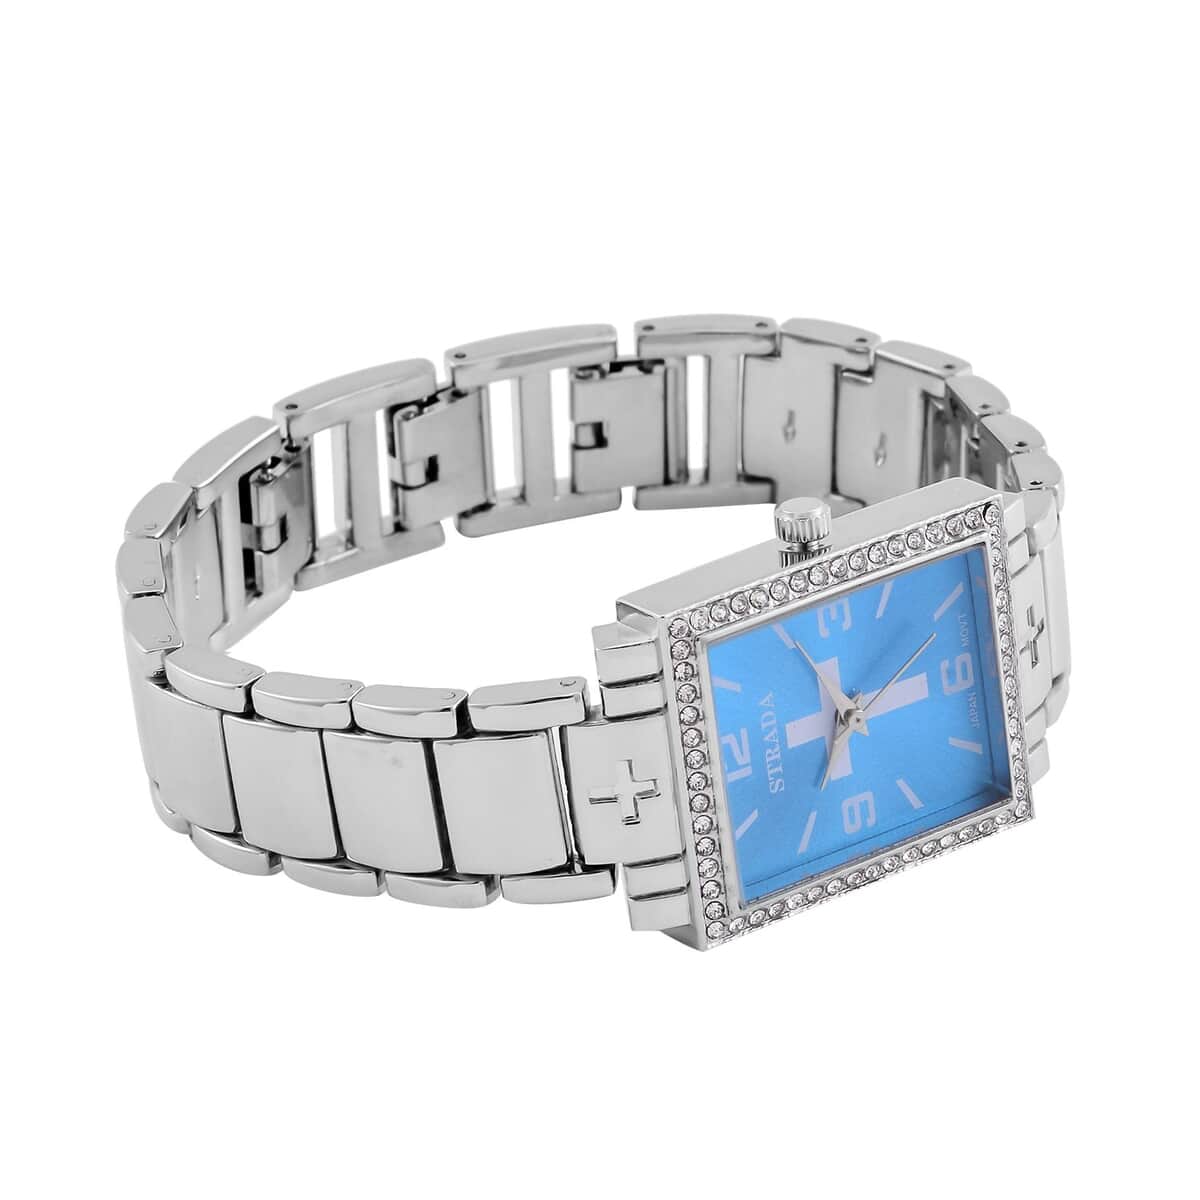 Strada White Austrian Crystal Japanese Movement Cross Pattern & Blue Dial Watch with Silvertone Strap (26.16-30.48 mm) (6.75-8.25 Inches) image number 5